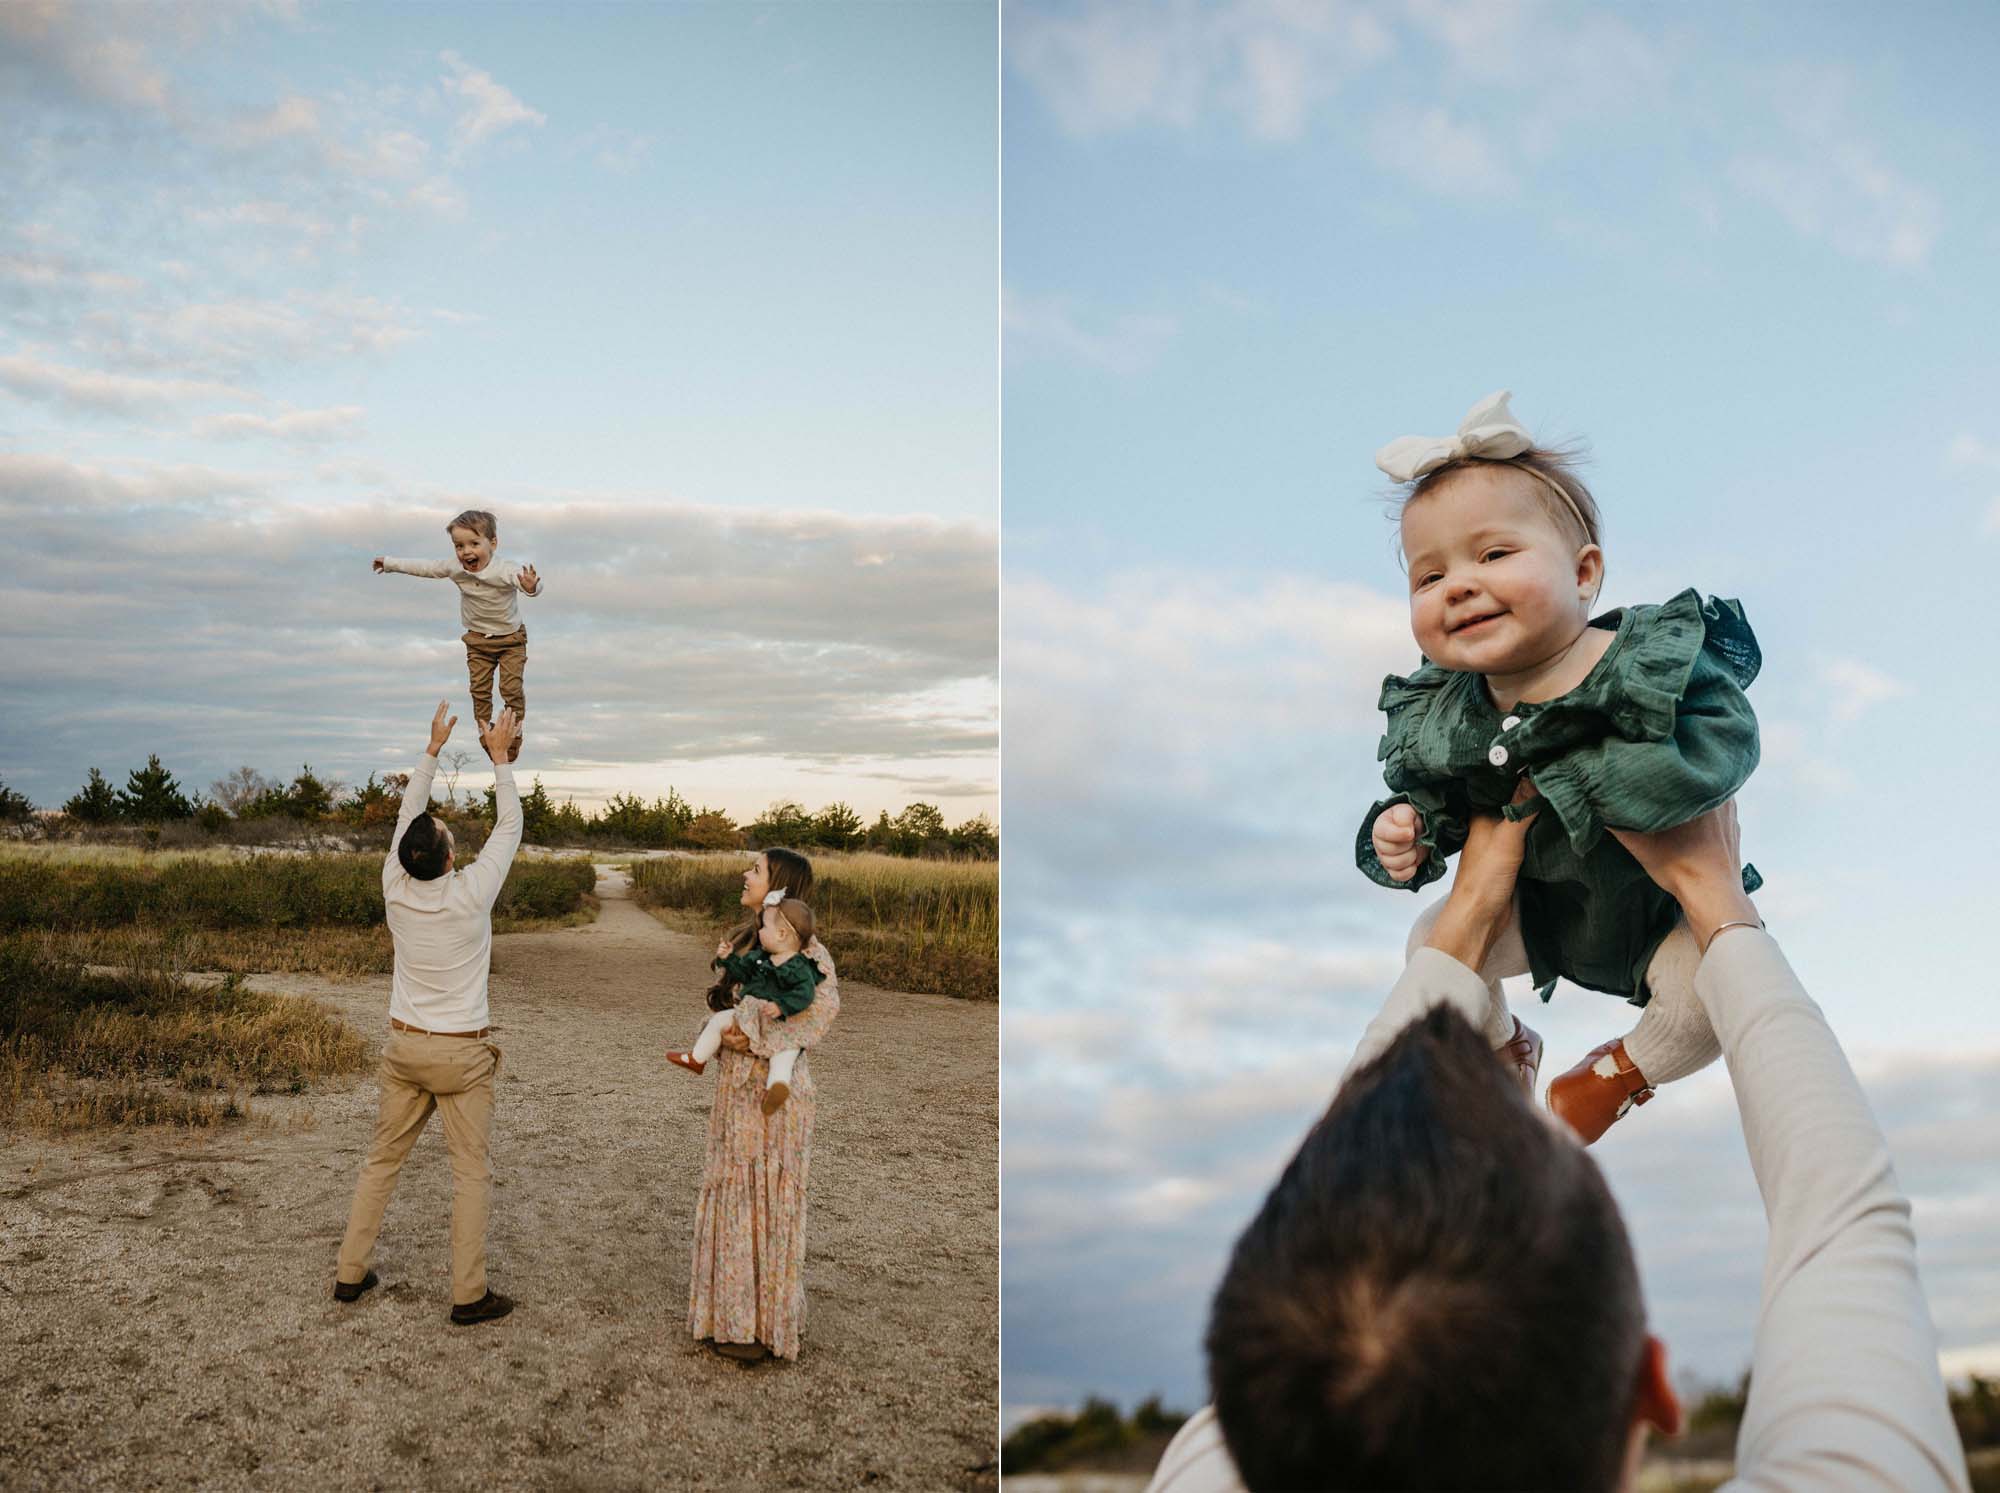 father and child fun family portrait pose idea throwing in air 